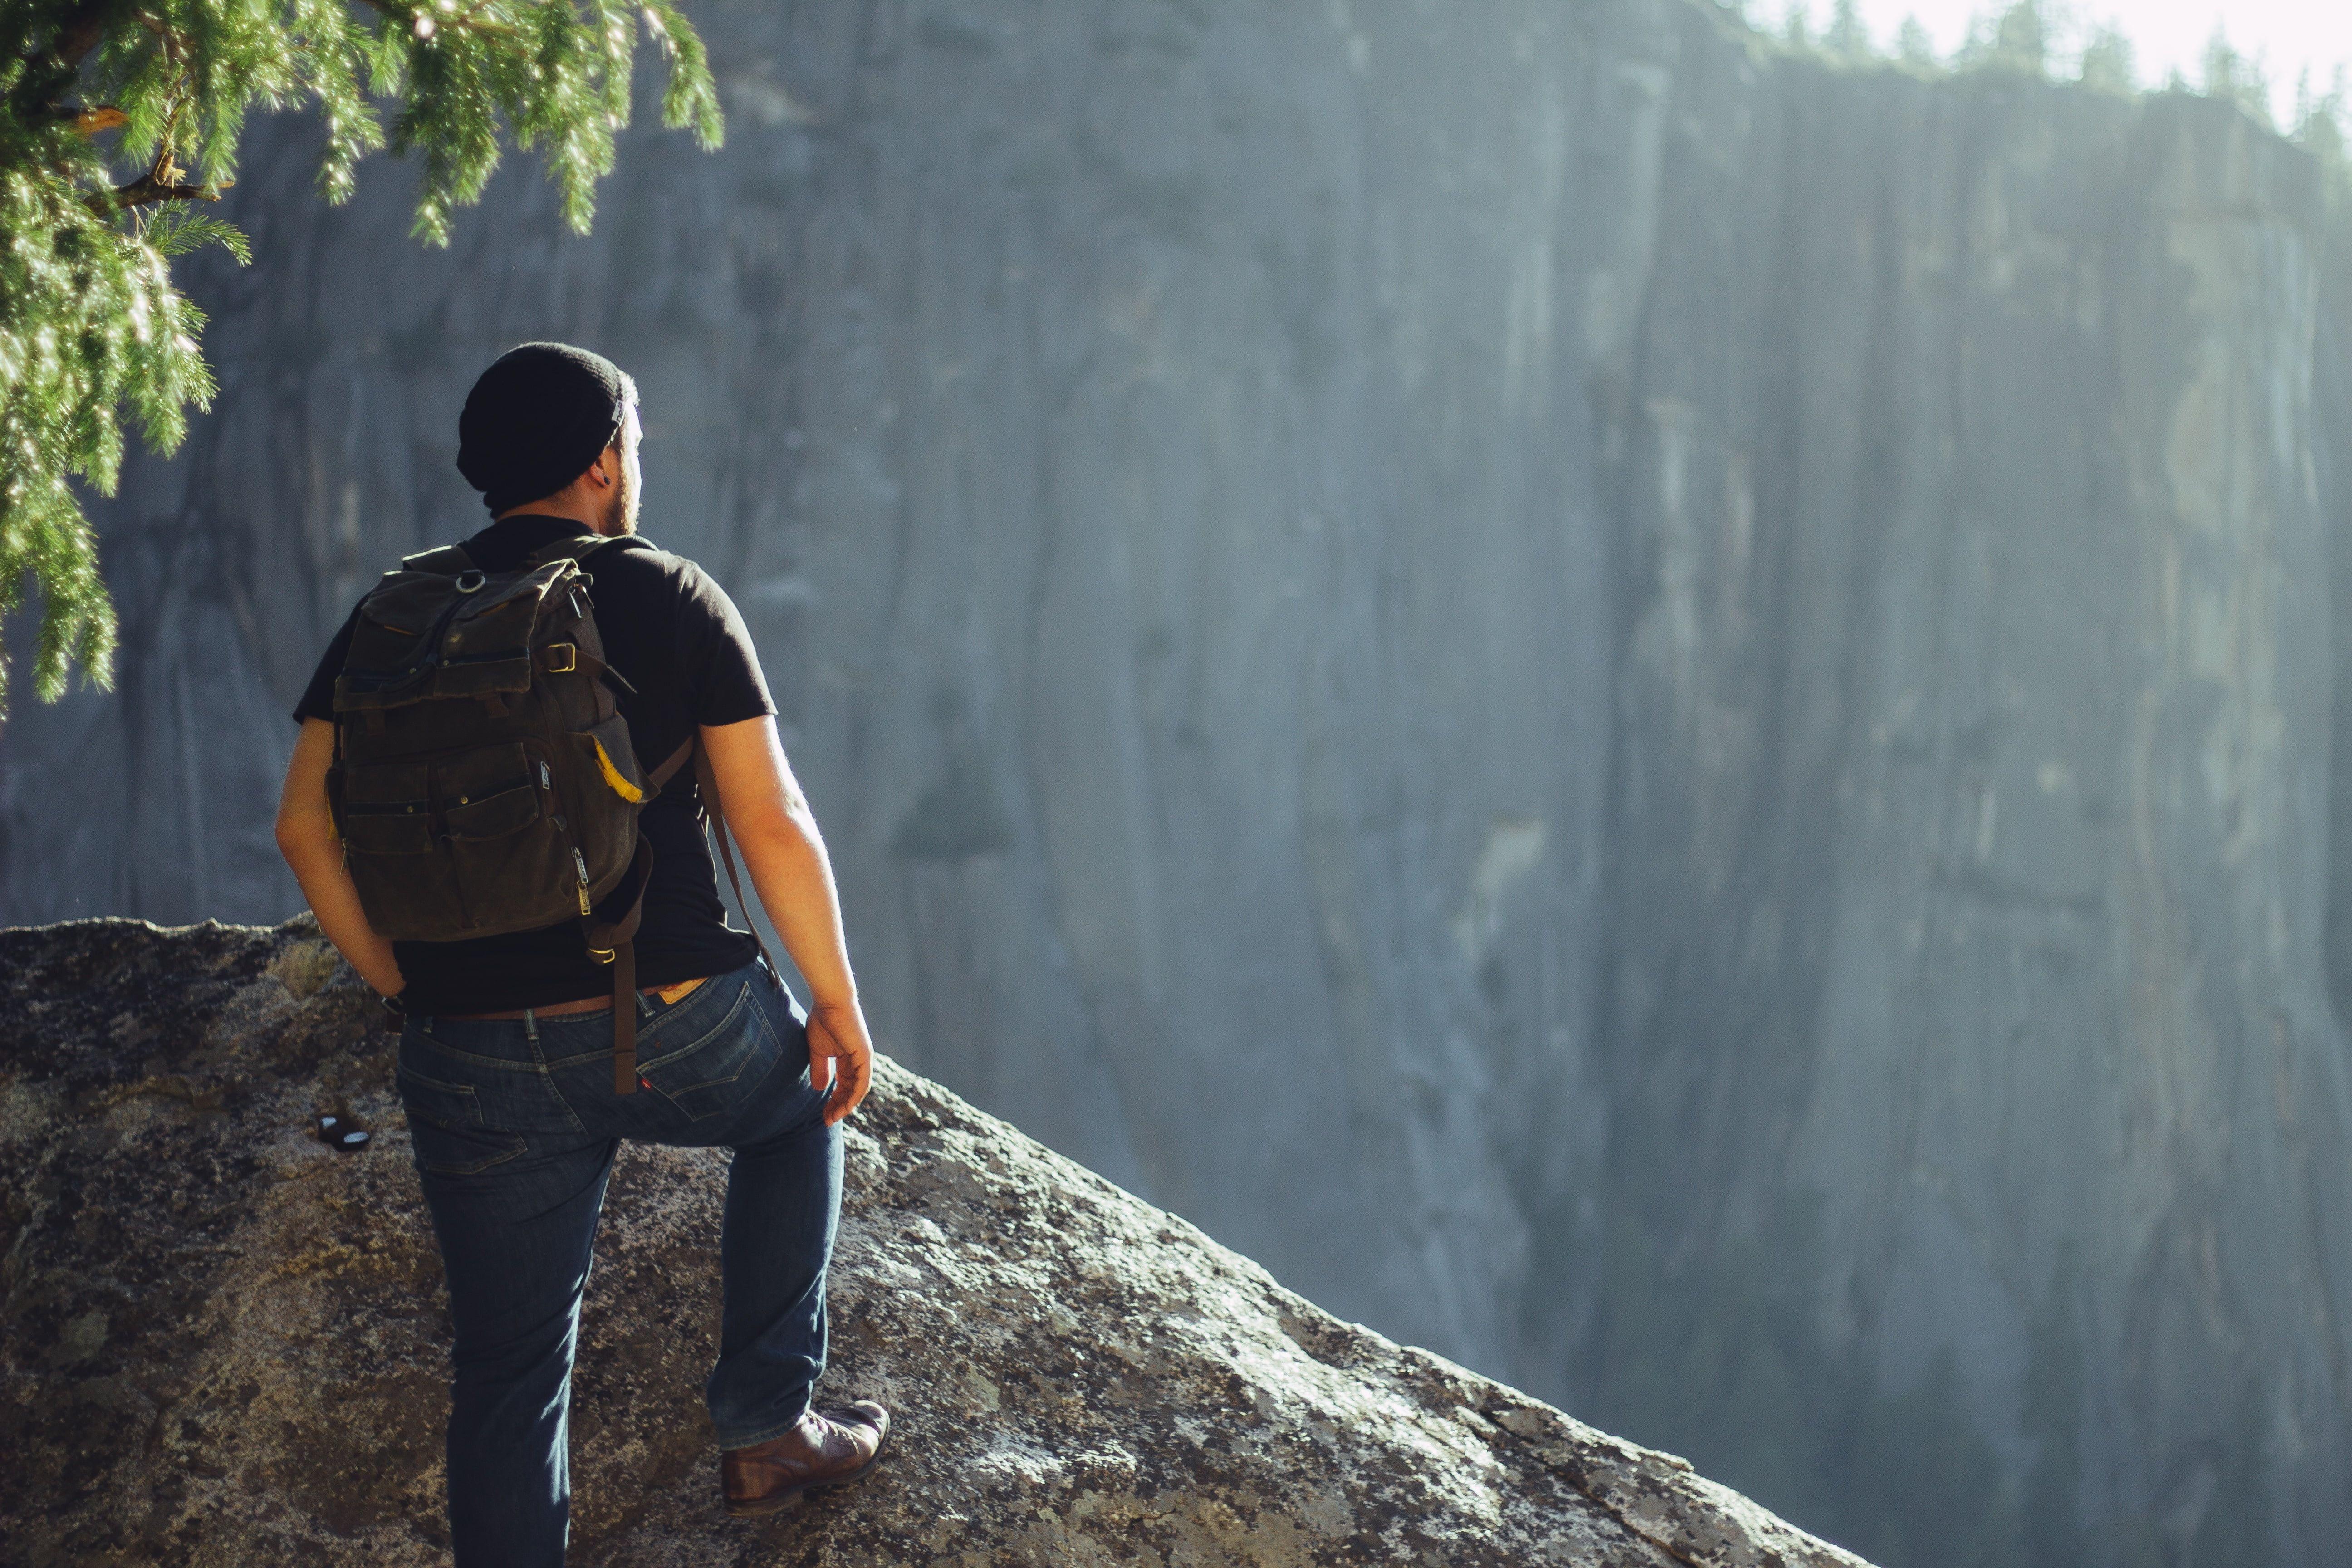 Man on top of rock formation wearing black backpack and shirt HD